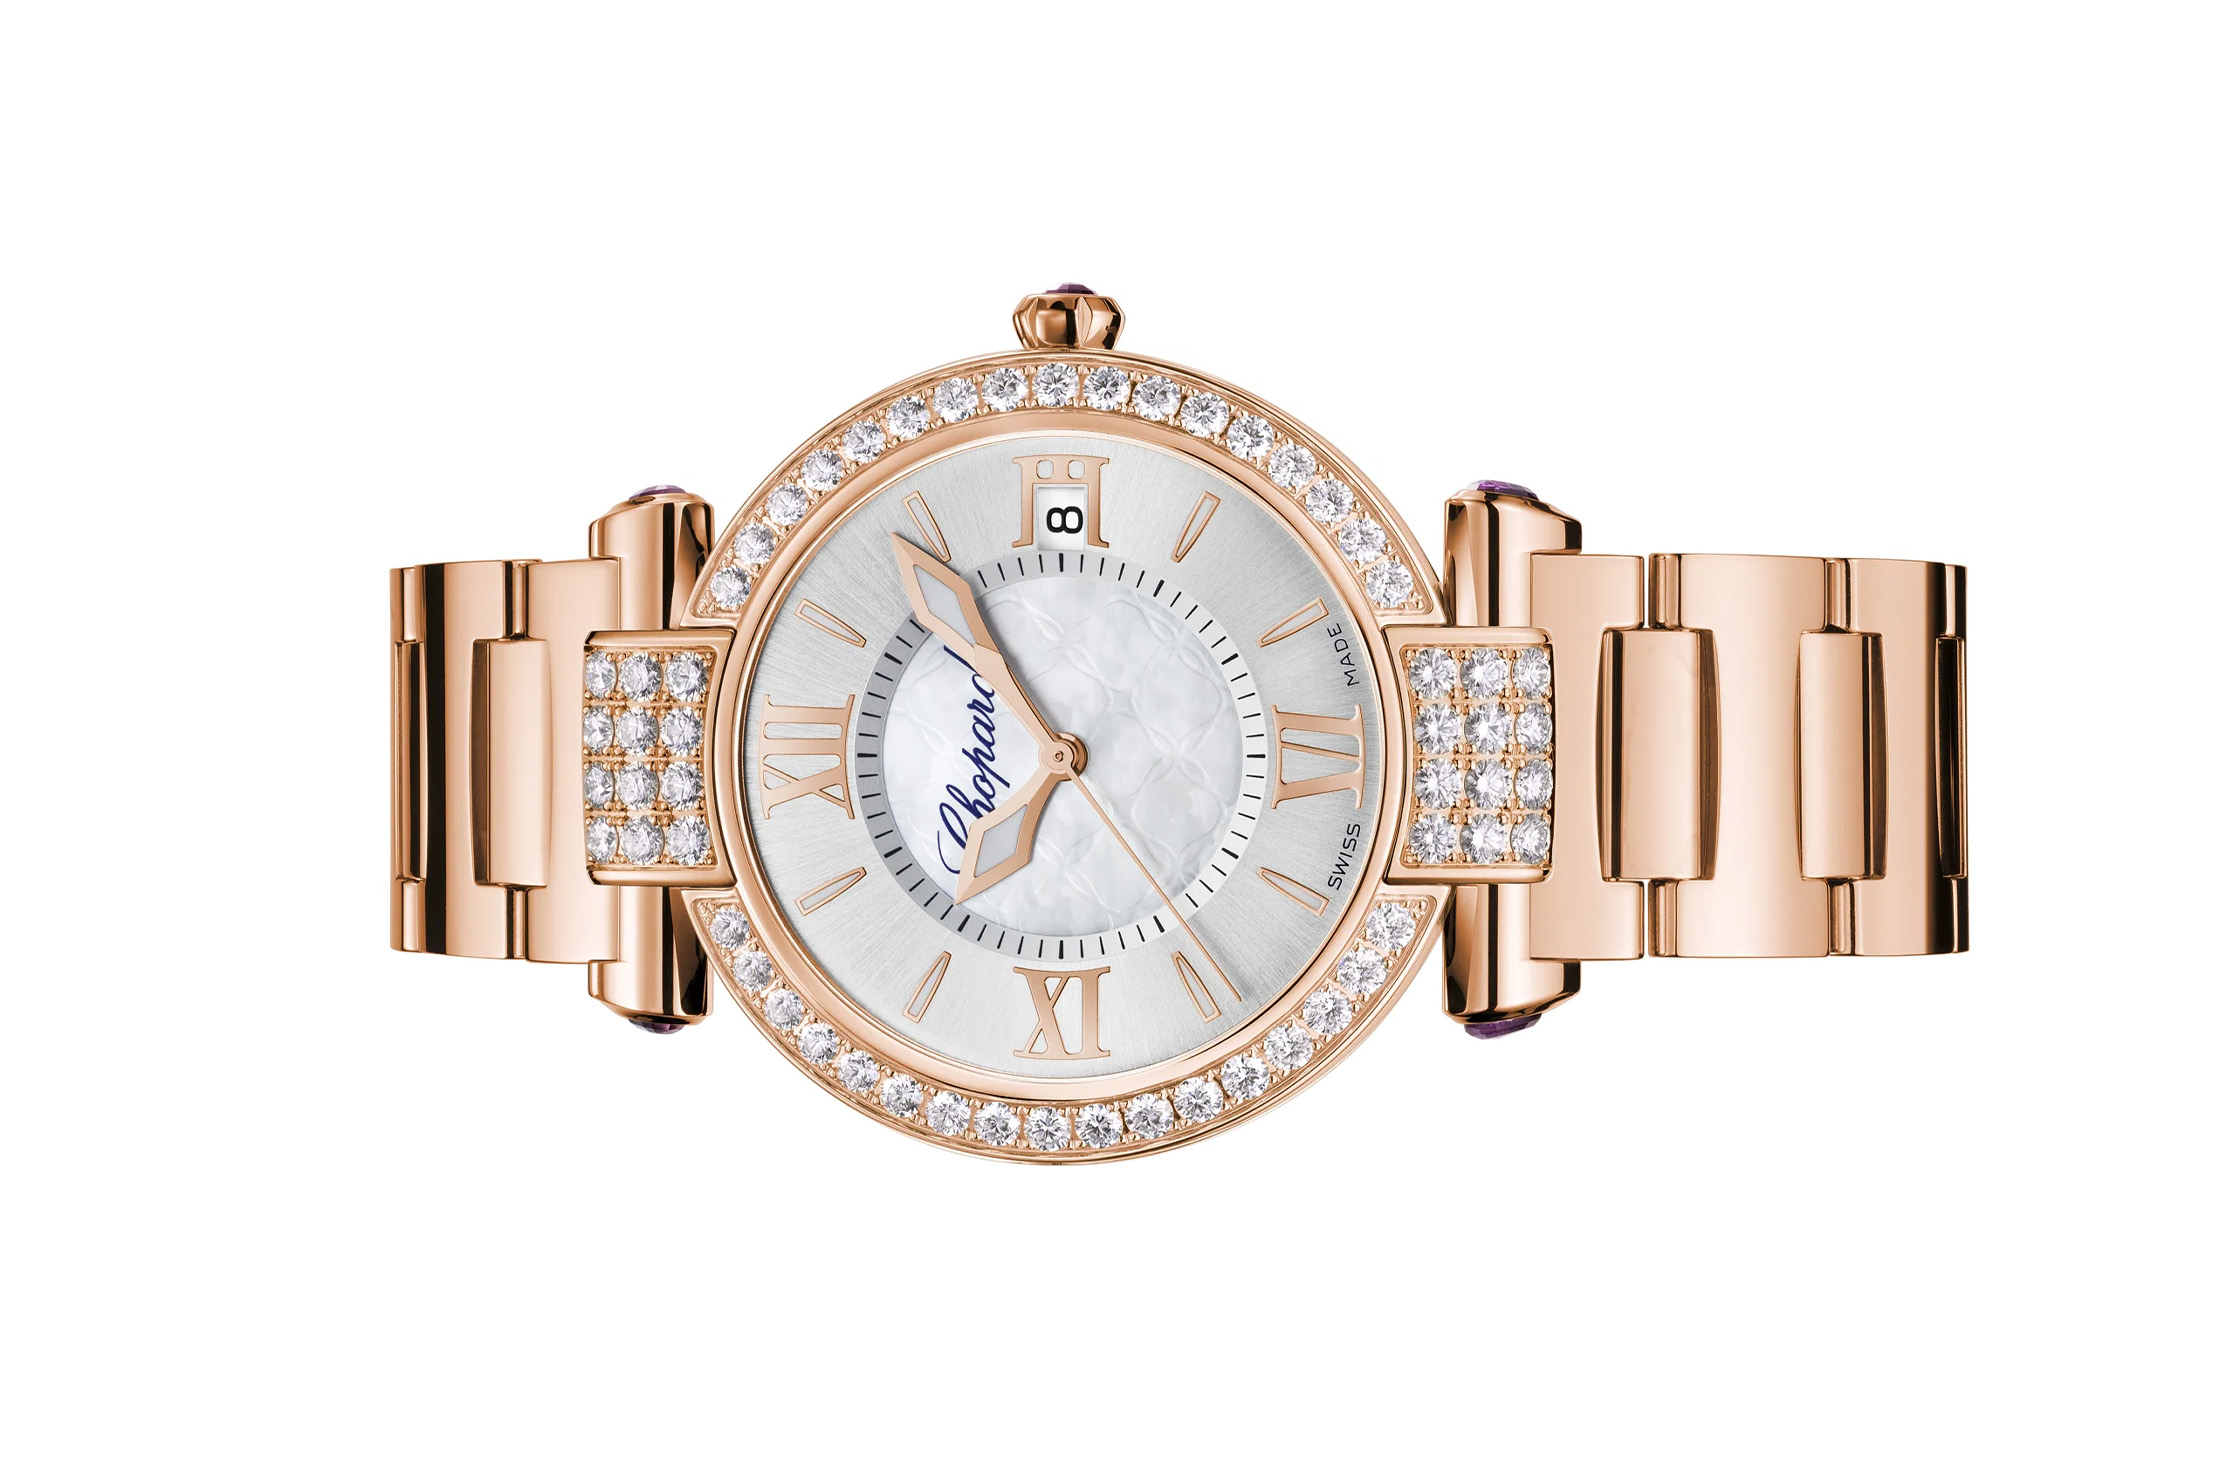 Đồng Hồ Chopard Imperiale 384822-5004